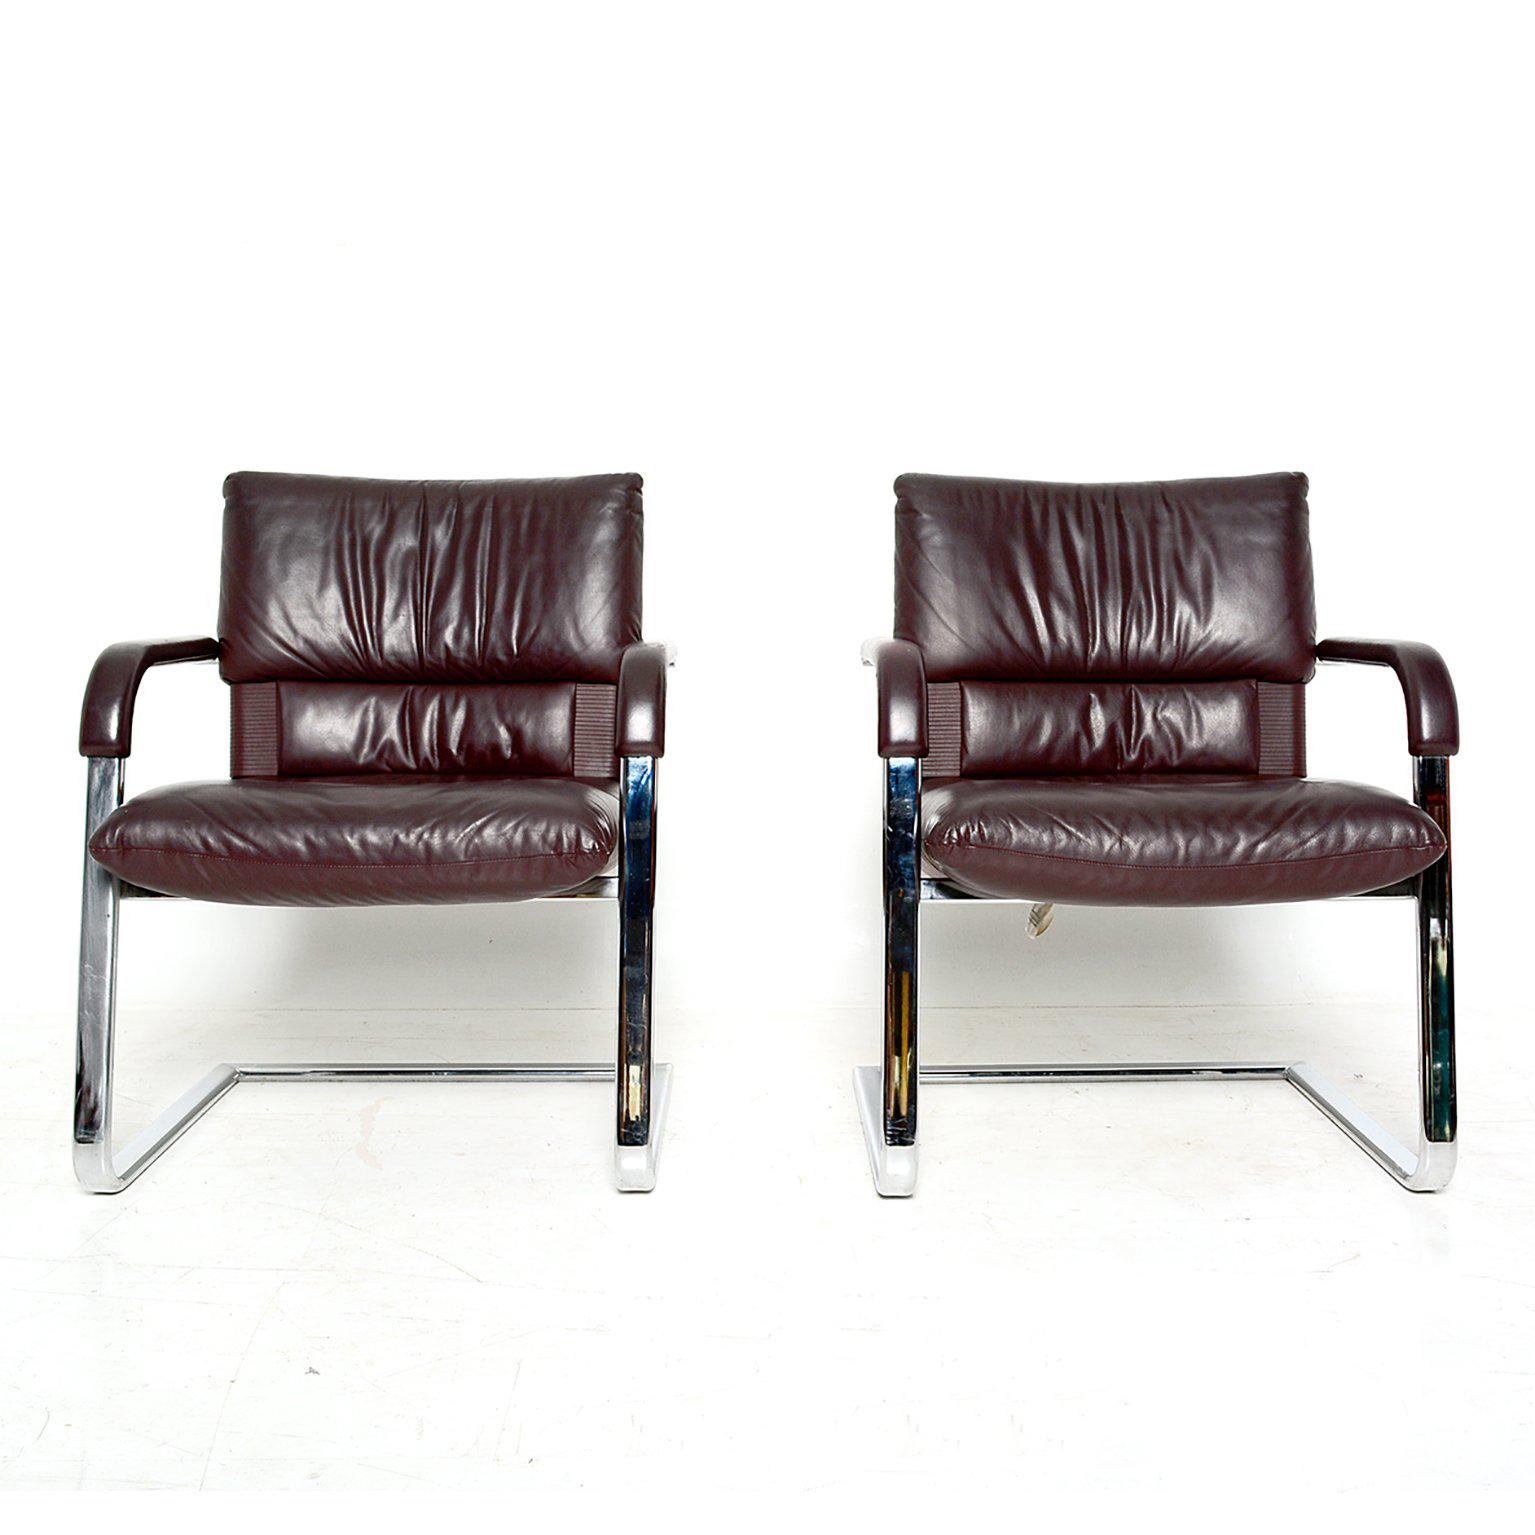 For your consideration a pair of Imago office armchairs designed by Mario Bellini for Vitra.
Chrome-plated steel frame with burgundy leather.
Signed by Mario Bellini.
9/11/86.